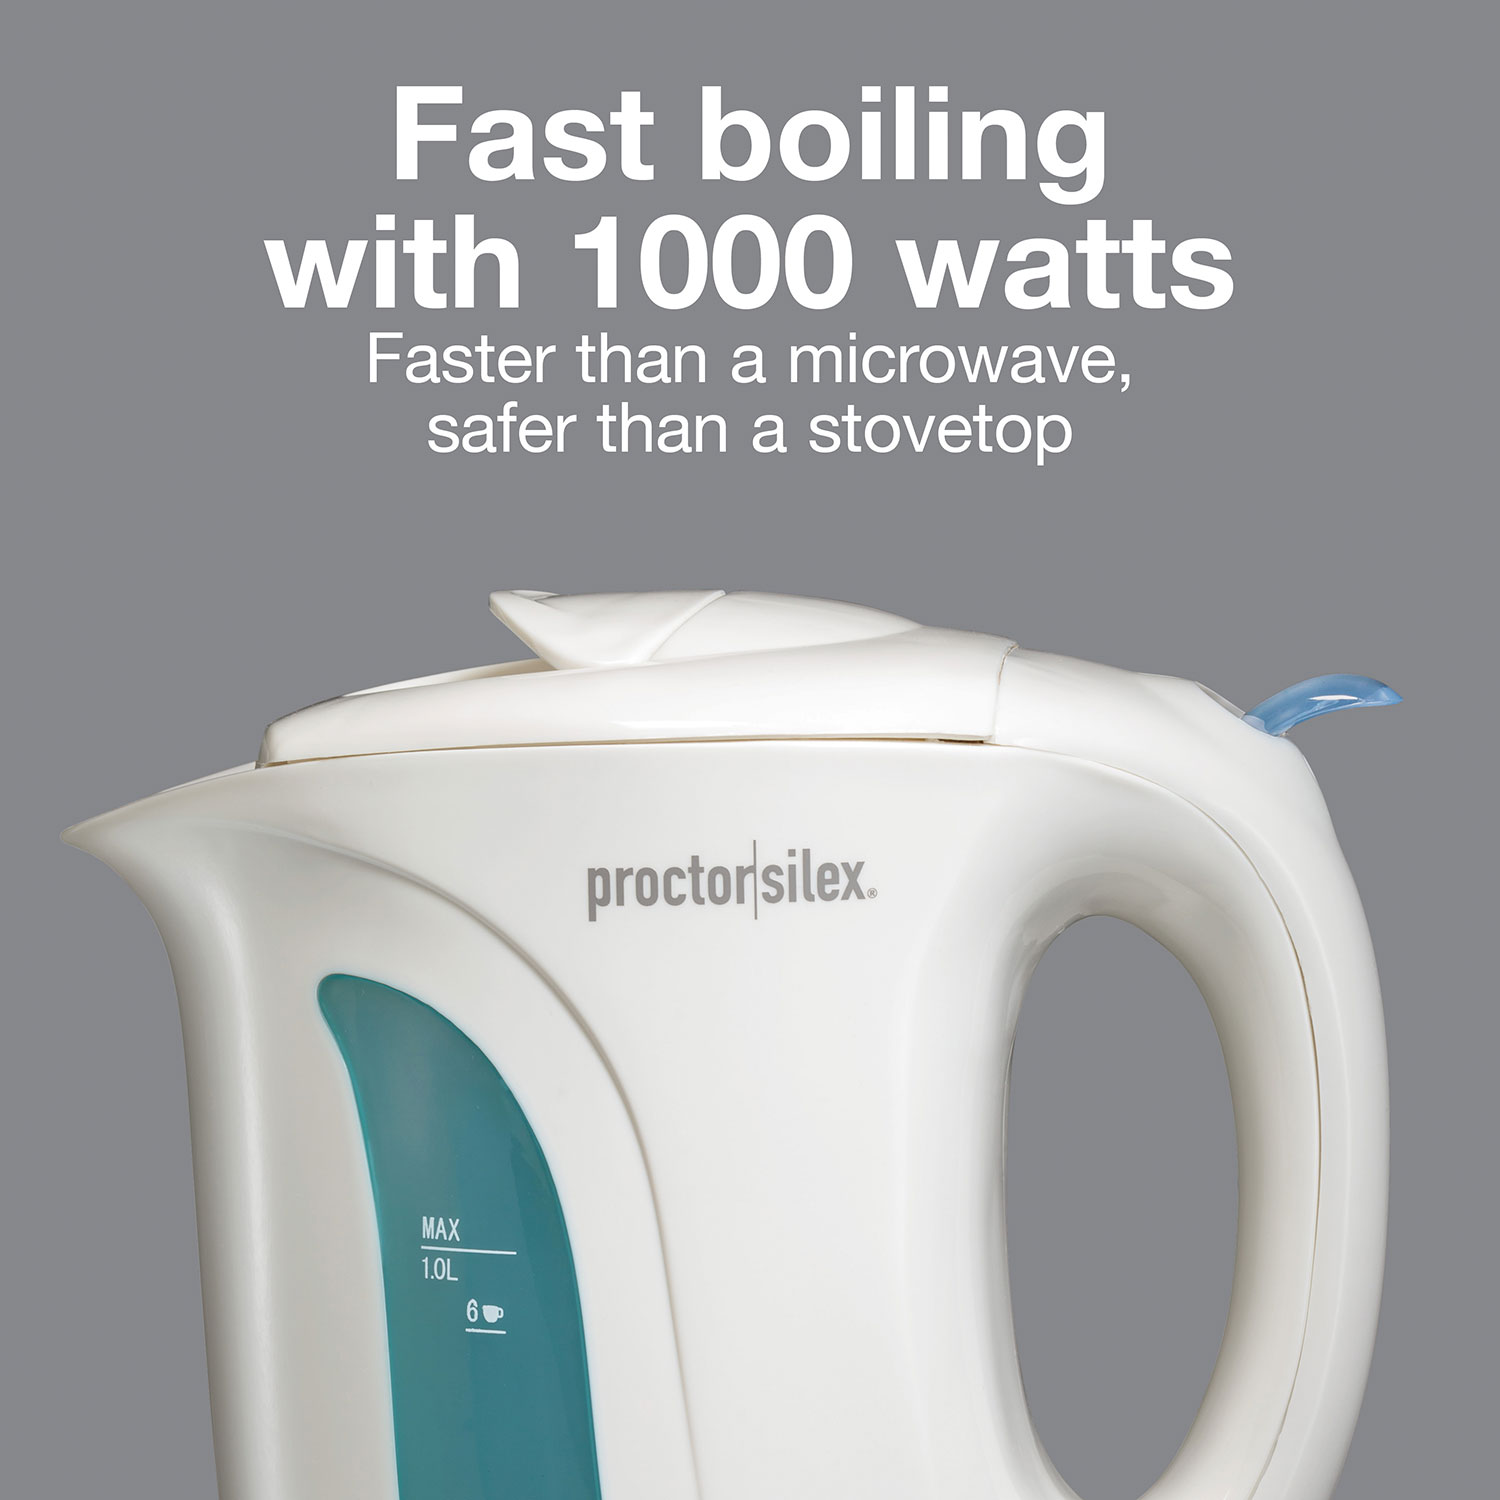 Pro Line® Series Electric Kettle